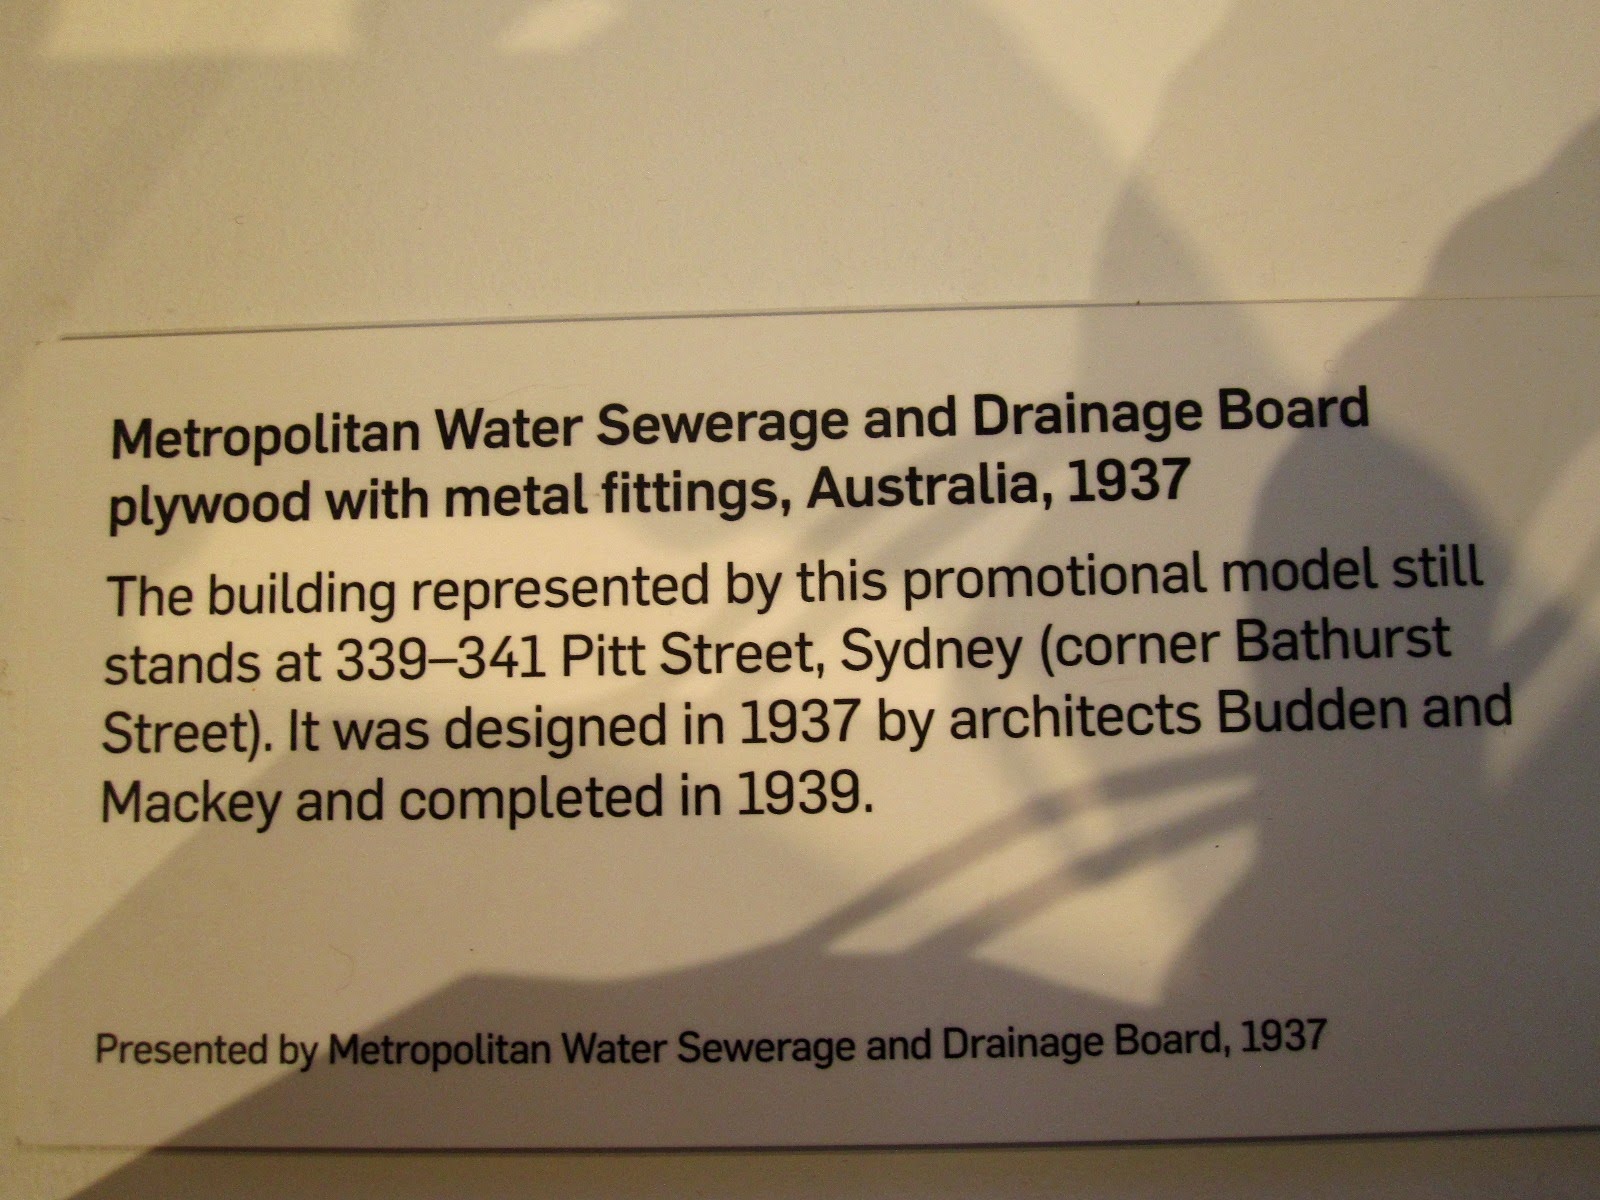 Exhibition sign for the model of the Metropolitan Water Sewerage and Drainage Board building.